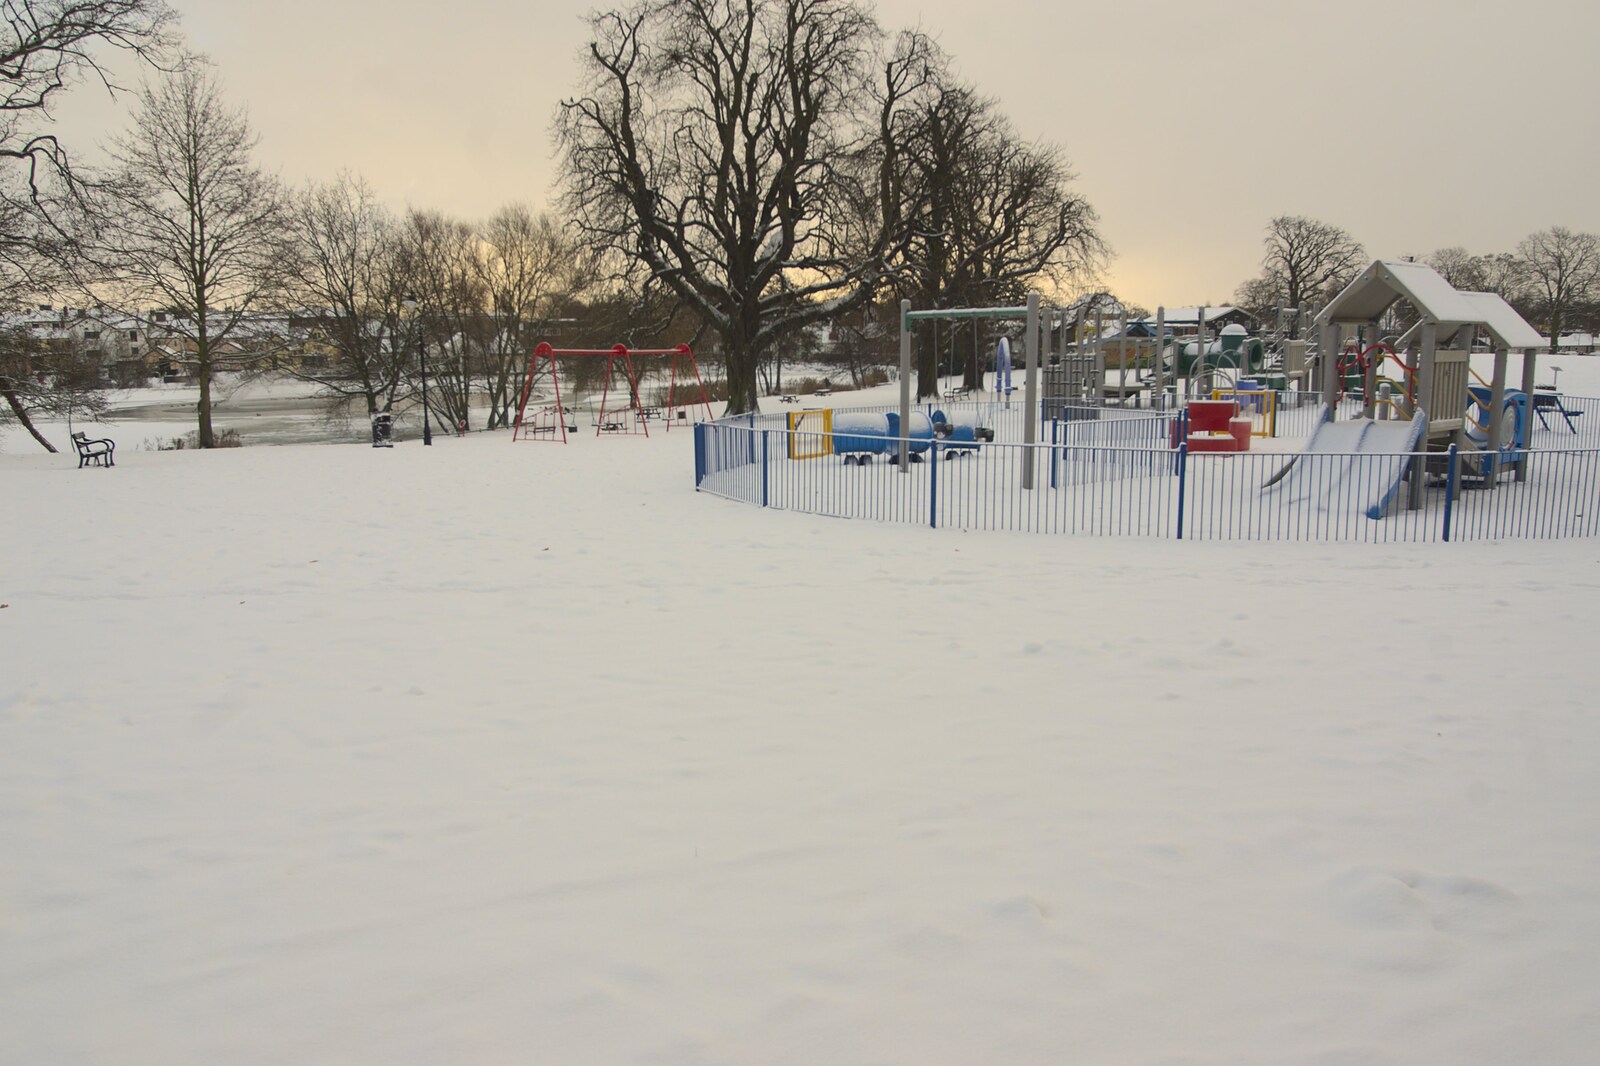 A Snowy Miscellany, Diss, Norfolk - 9th January 2010: The playground